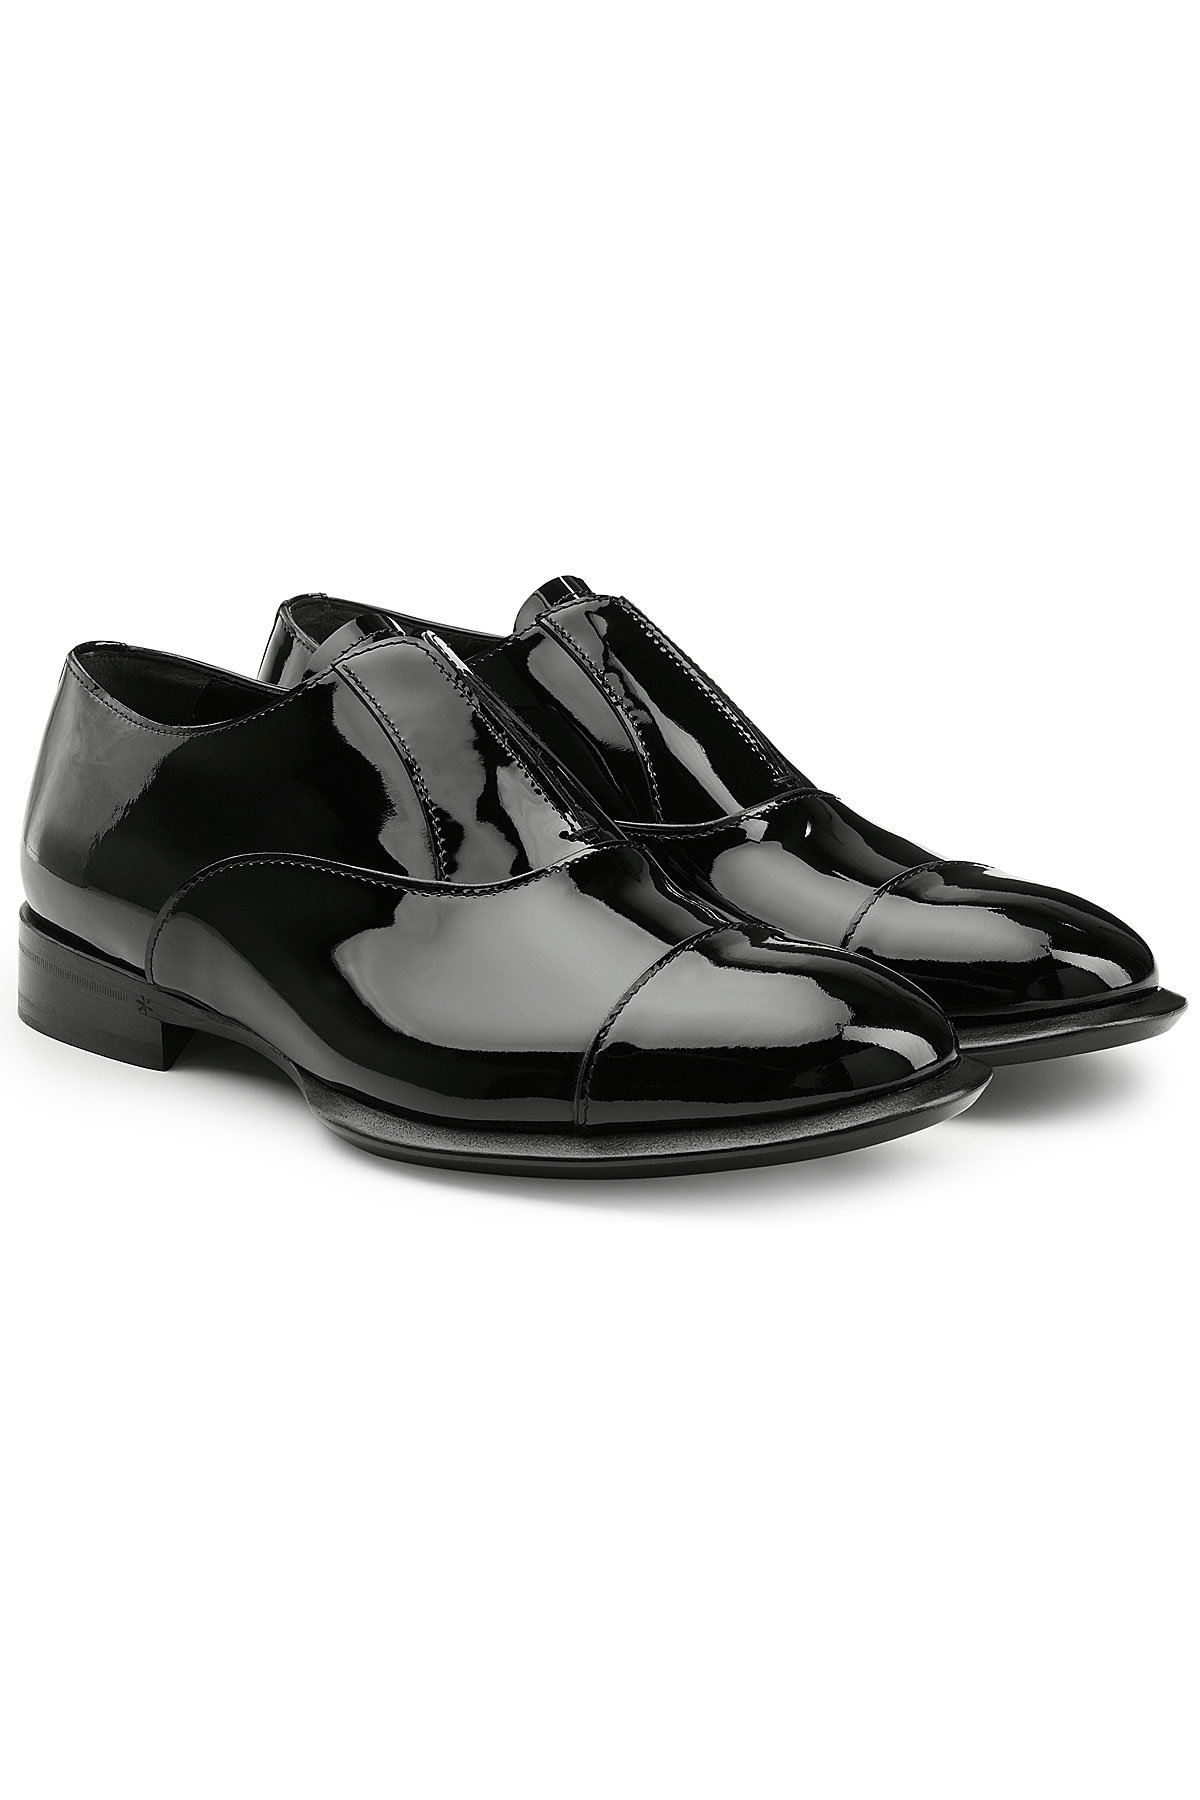 Alexander McQueen - Patent Leather Pumps with Sock